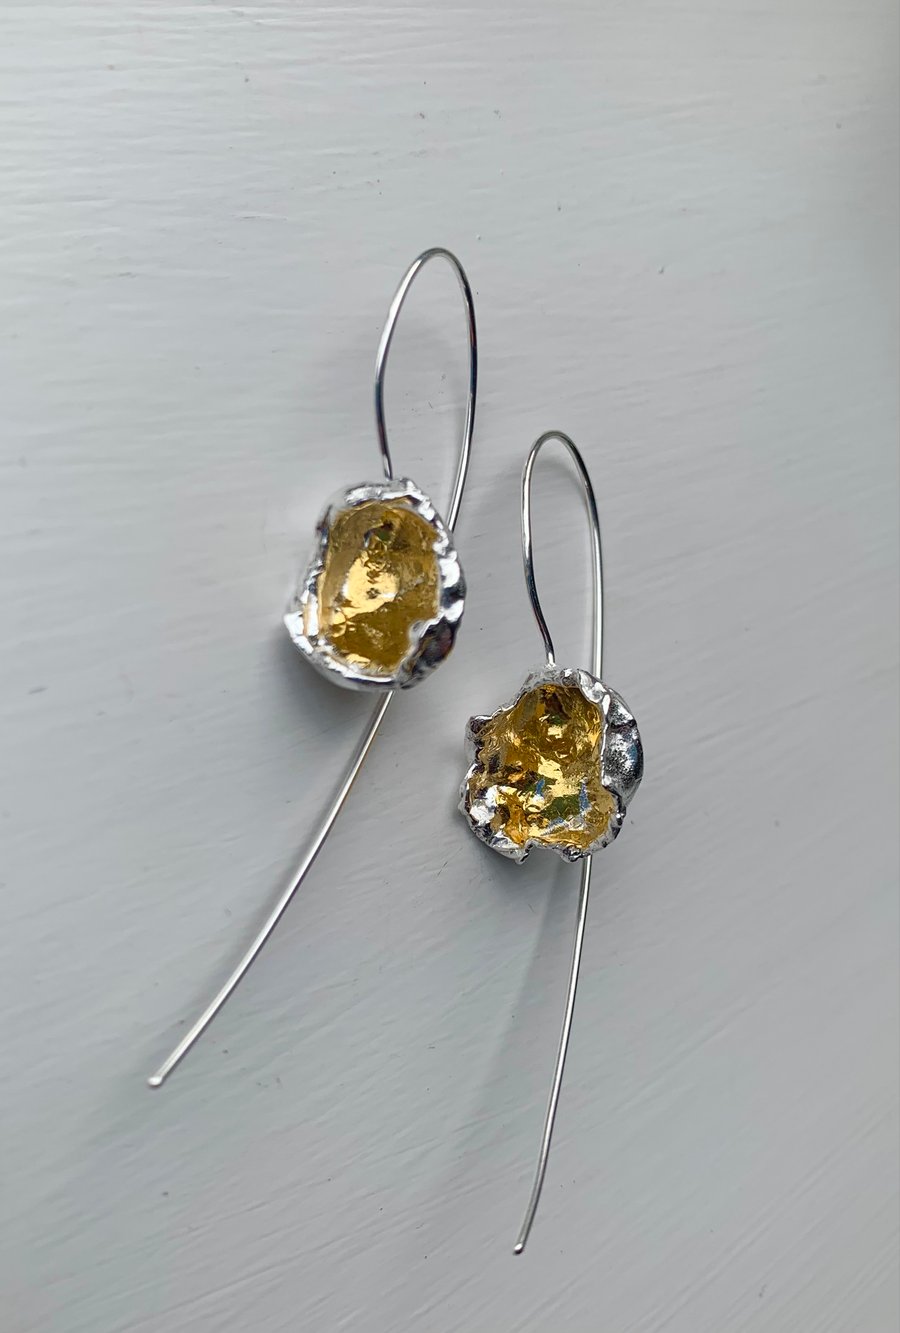 Silver and gold stem earrings